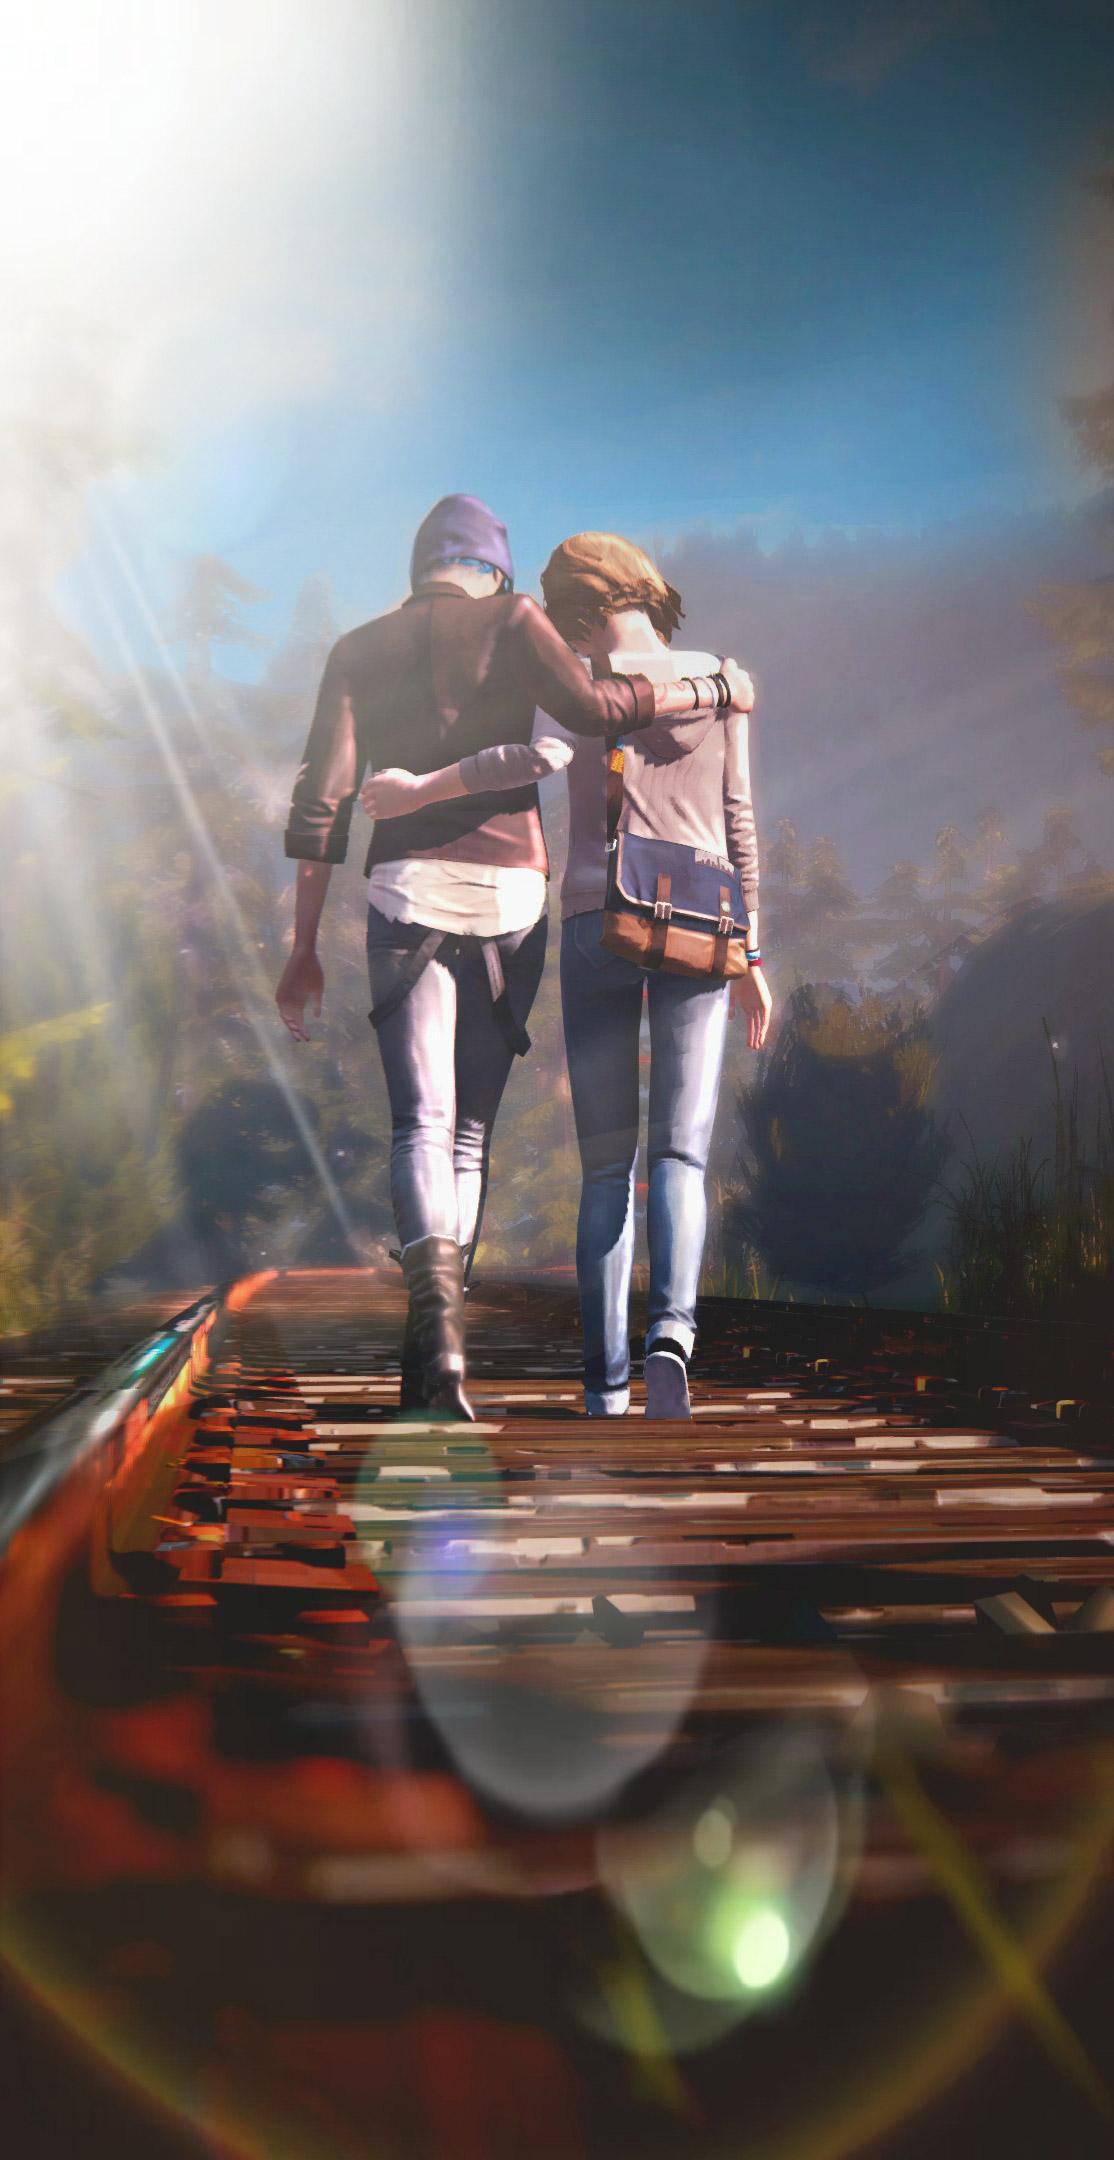 [no Spoilers] My Current Life Is Strange Season 1 Phone - Life Is Strange , HD Wallpaper & Backgrounds